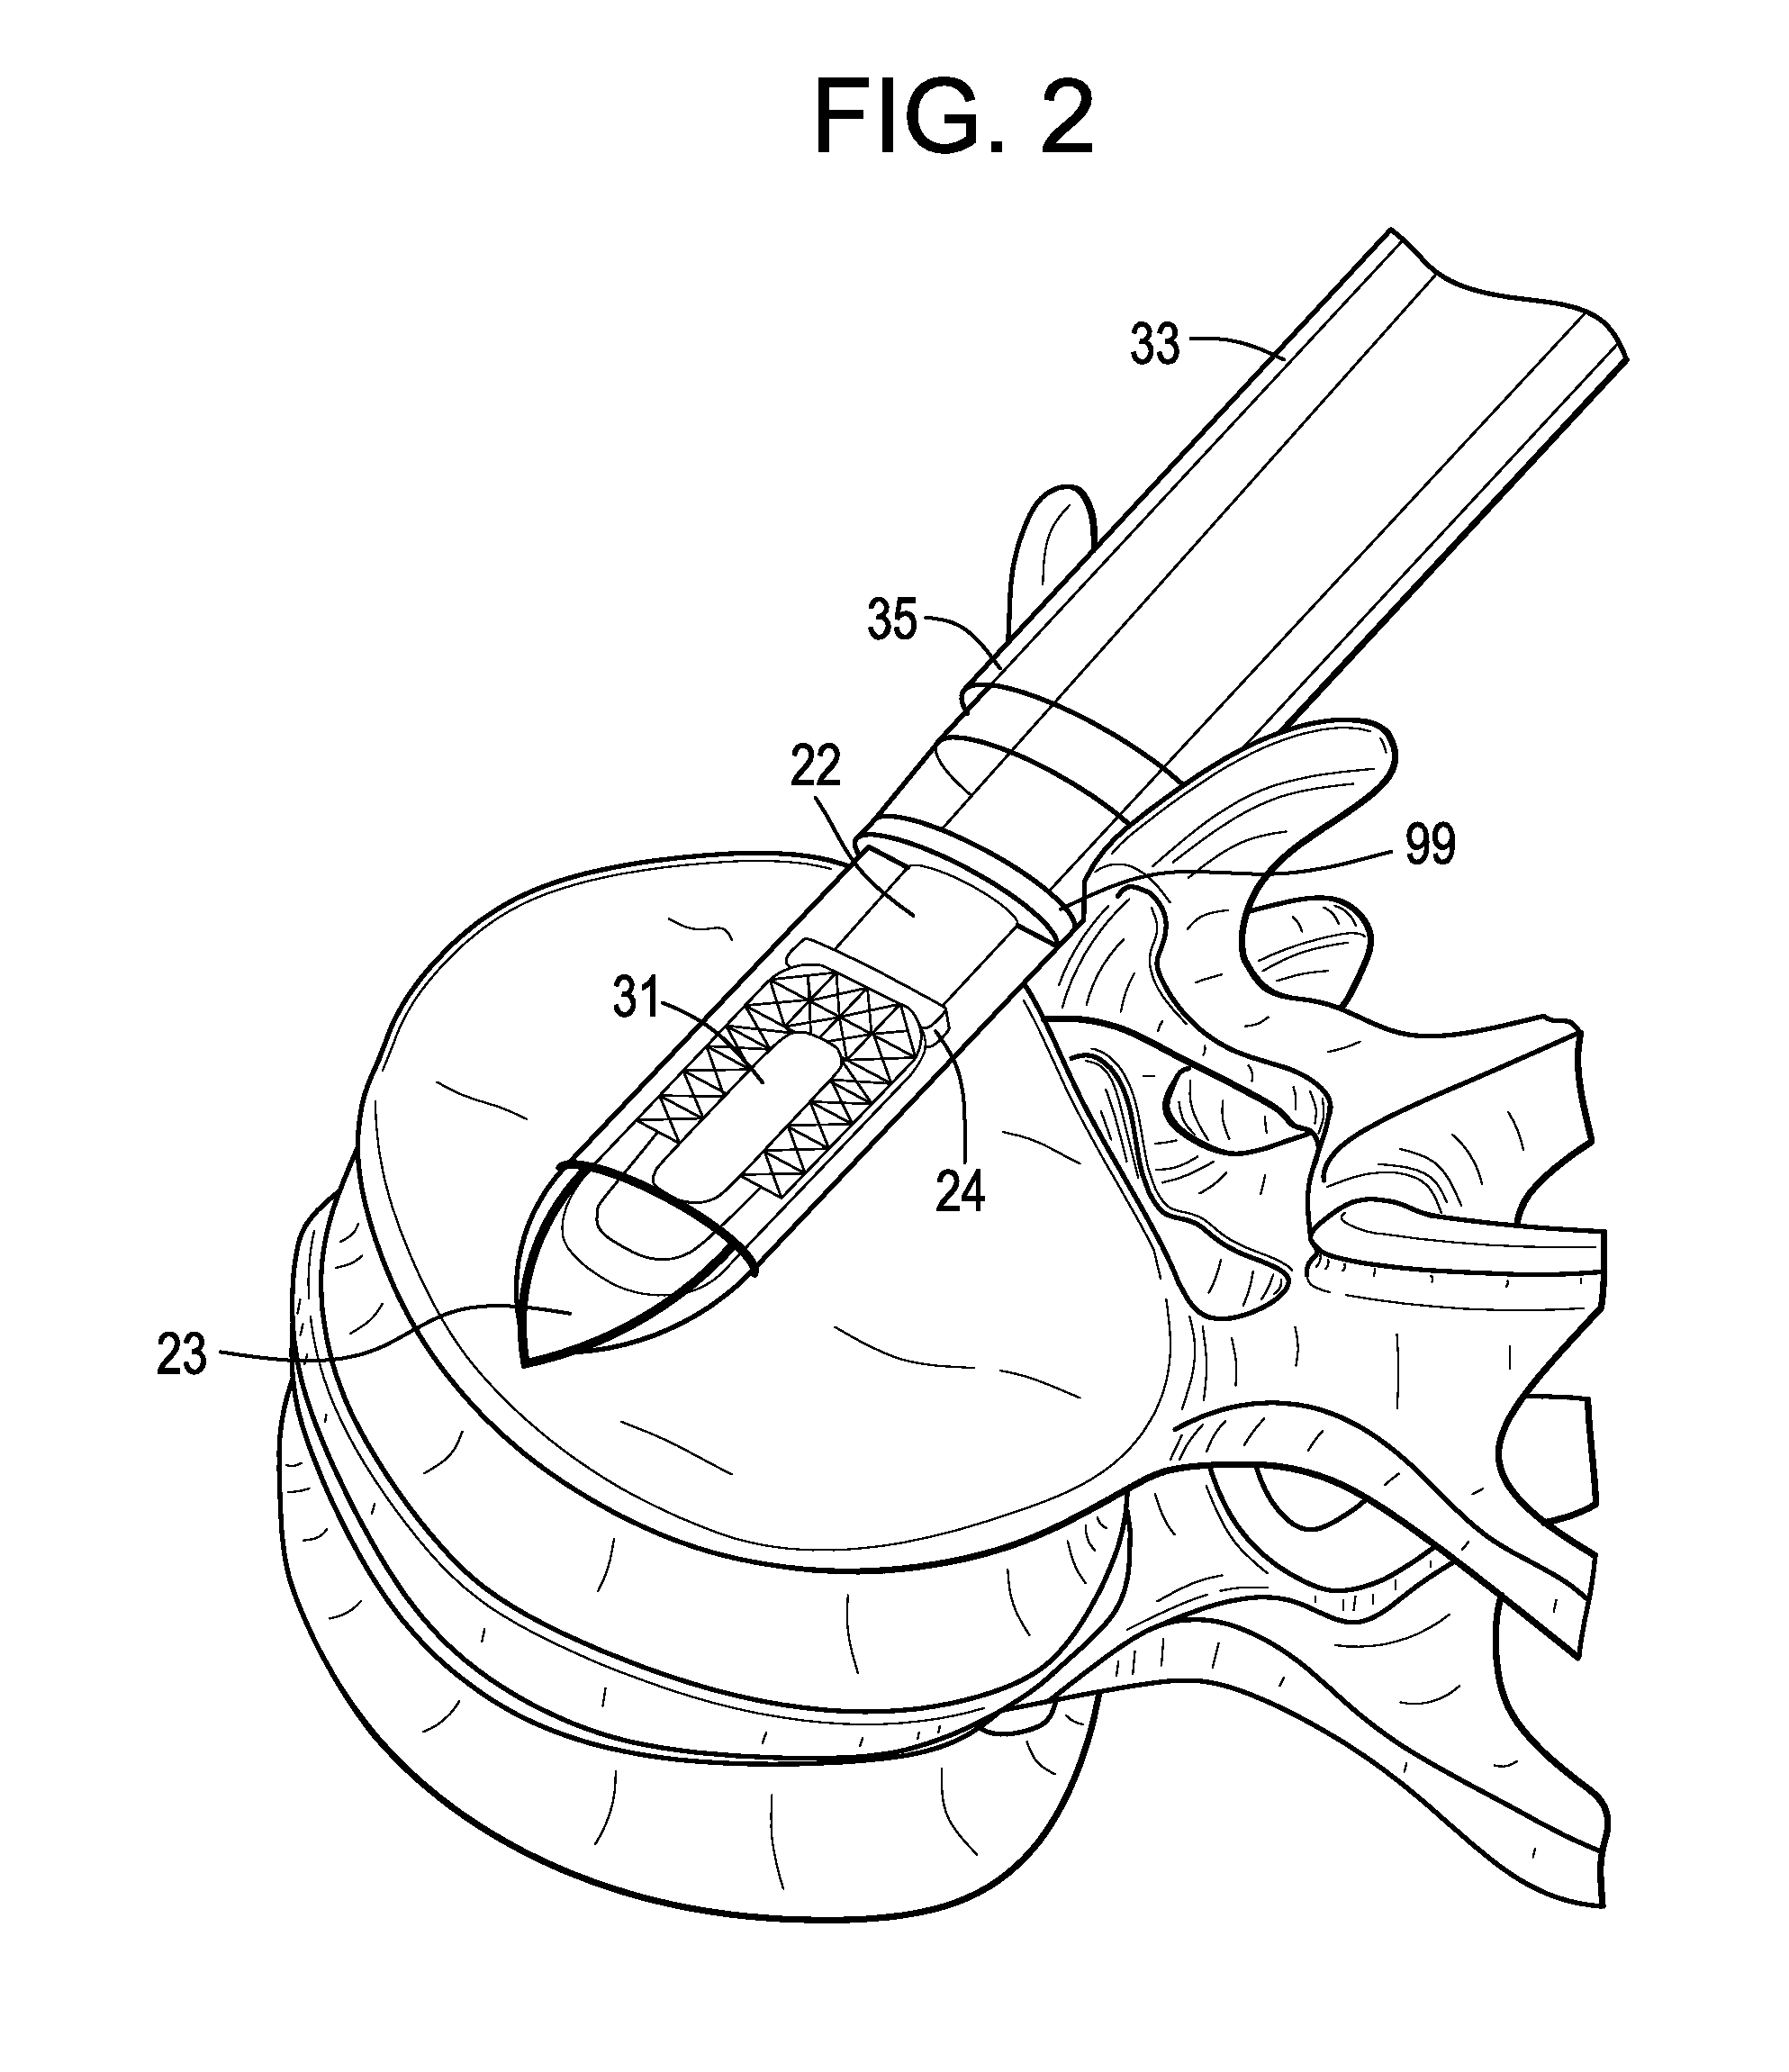 Enhanced Cage Insertion Device